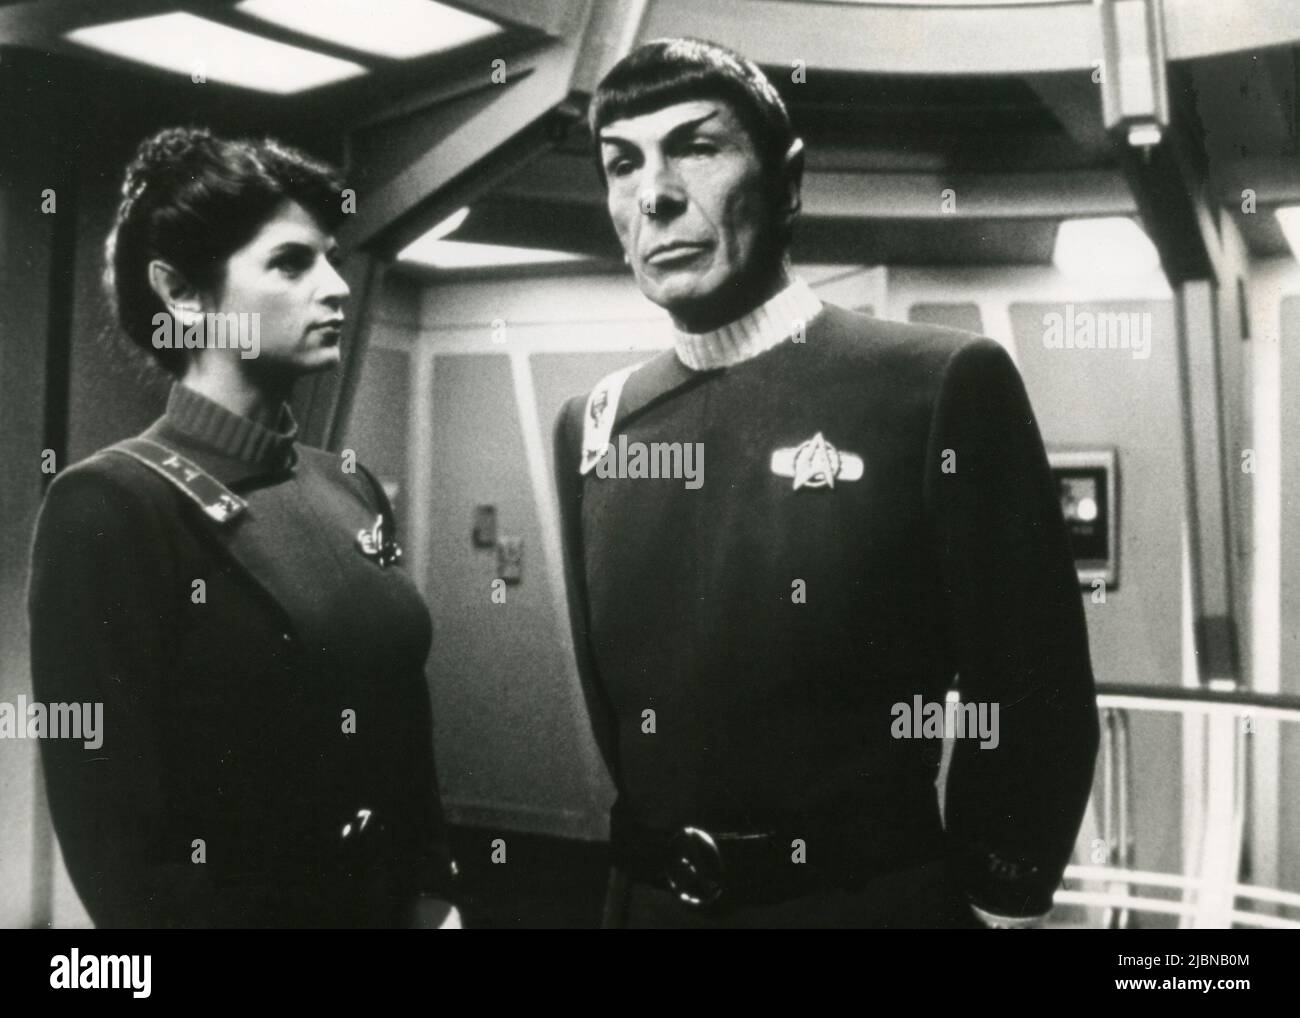 Actor Leonard Nimoy as Mr. Spock and actress Kirstie Alley in the movie Star Trek II: The Wrath of Khan, USA 1982 Stock Photo